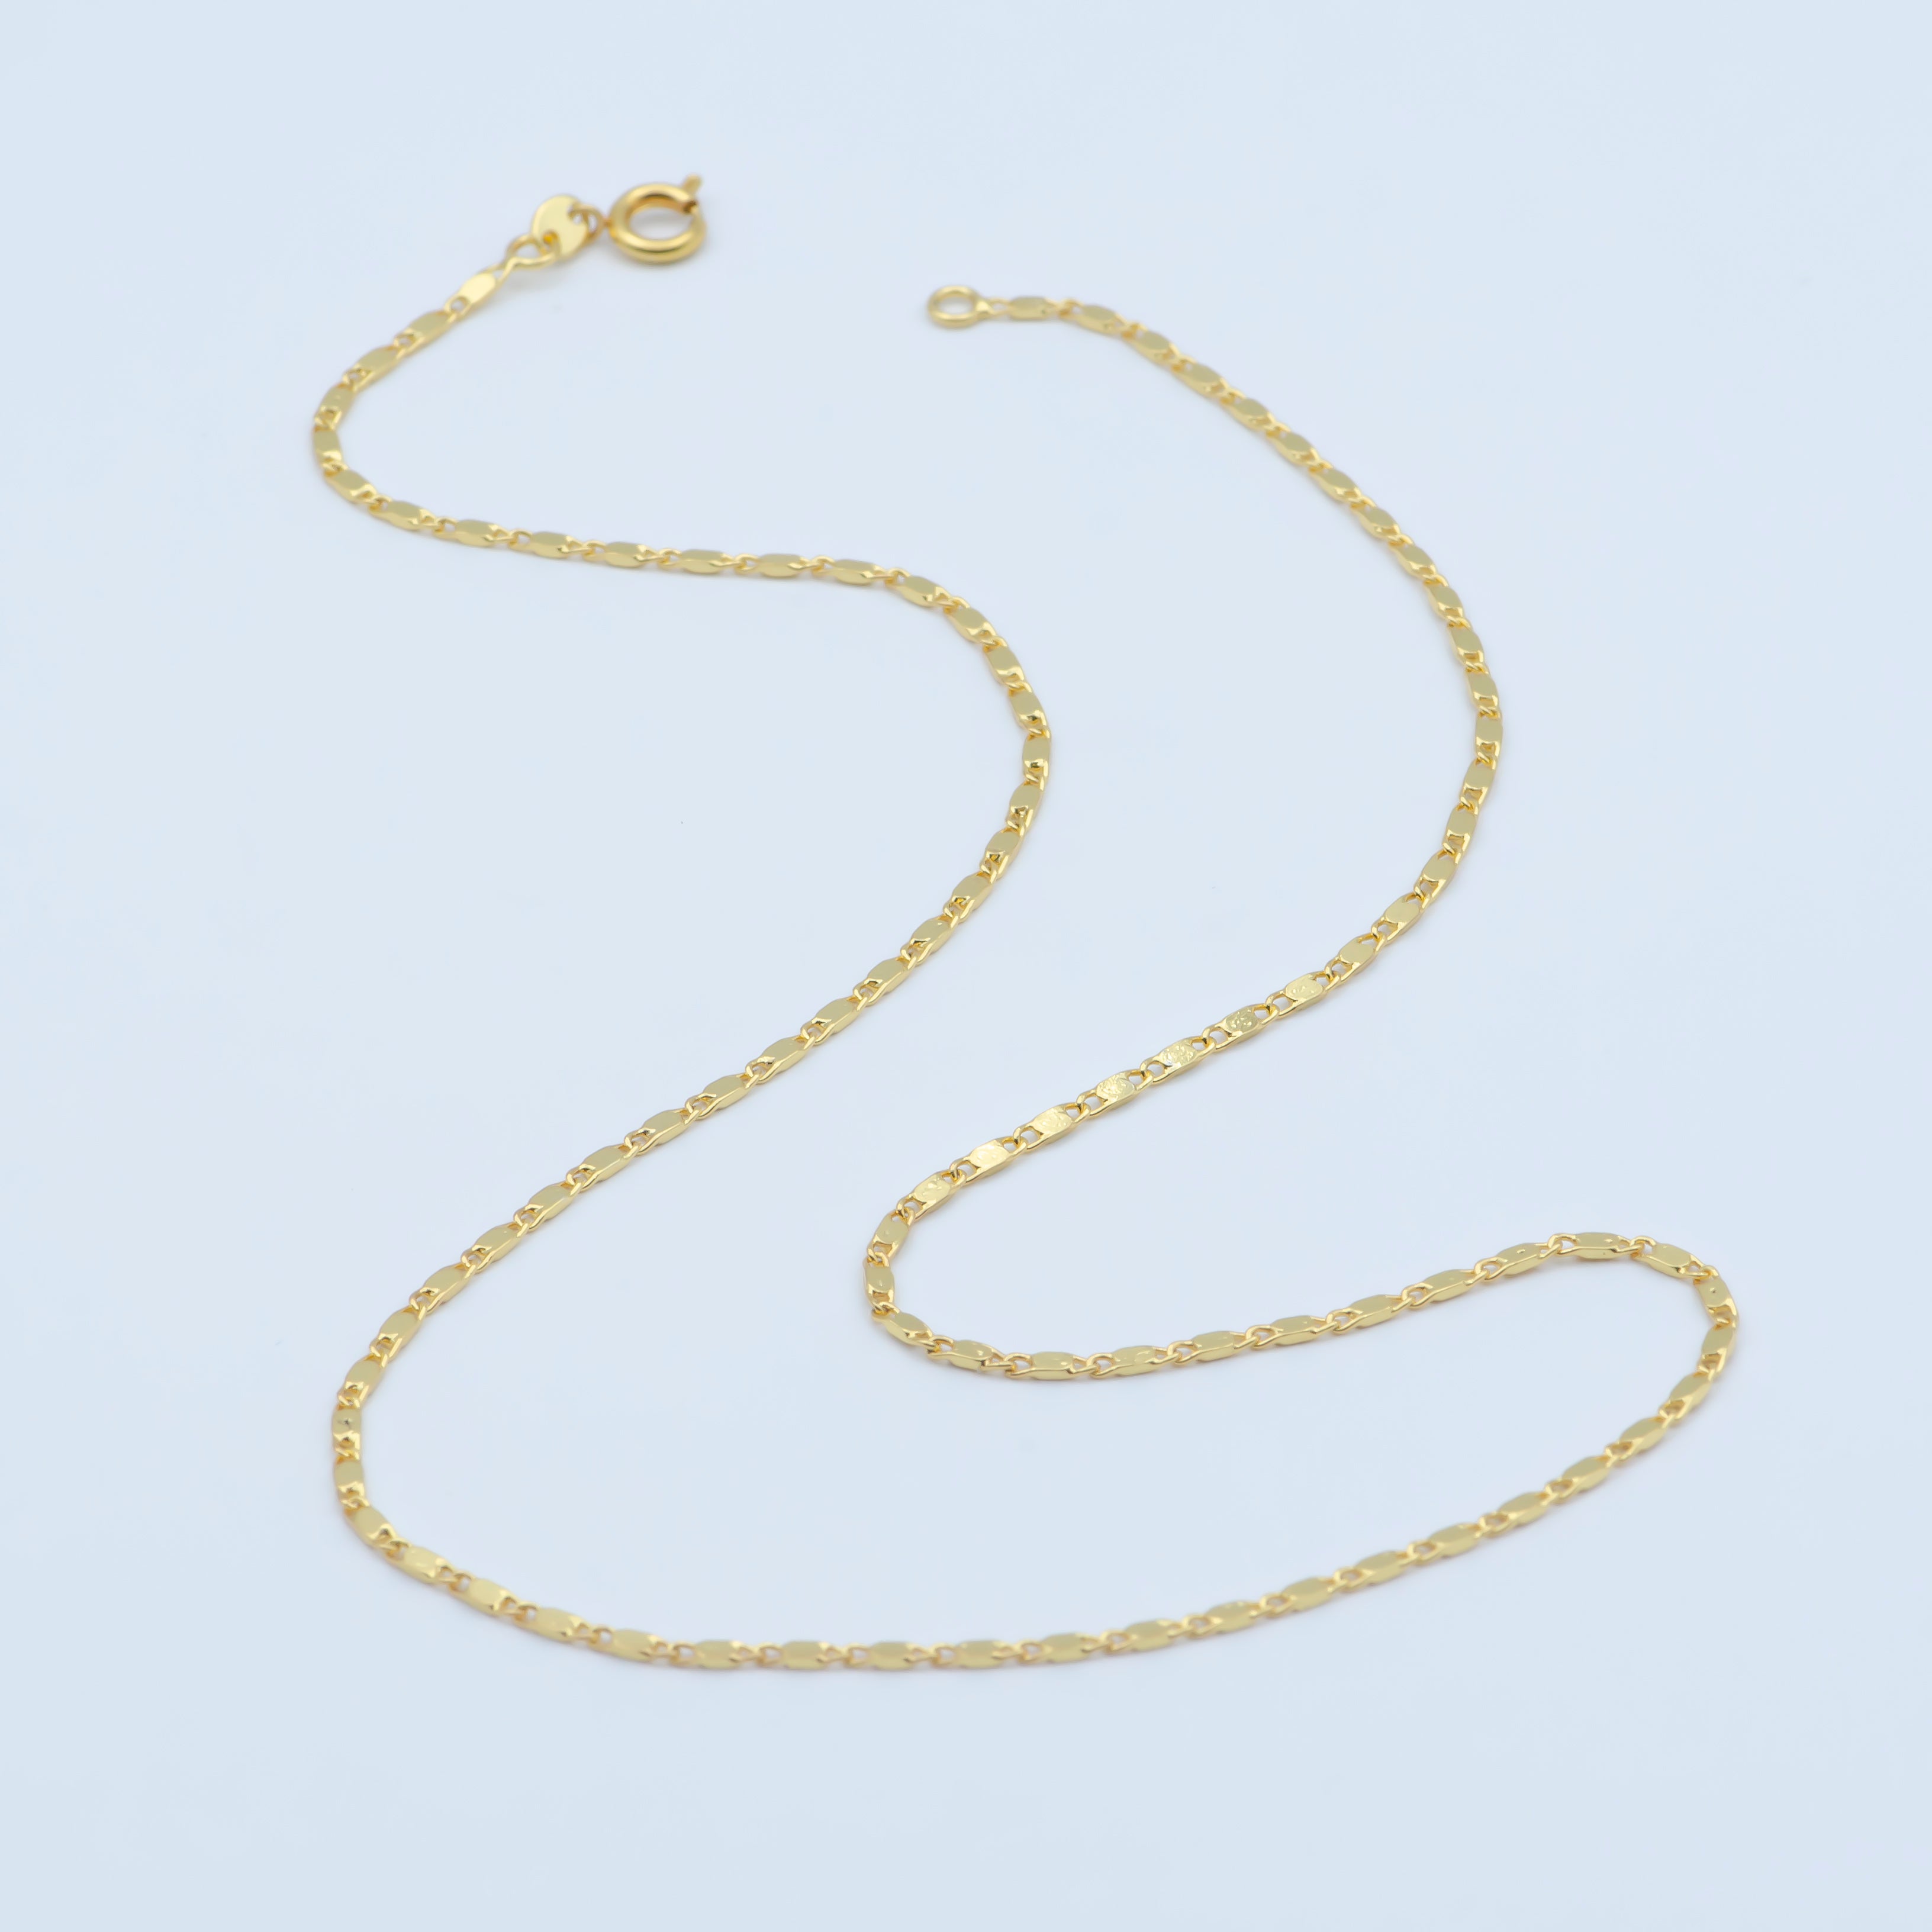 24K Gold Filled 1.8mm Minimalist Unique Link 18 Inch Layering Chain Necklace | WA-190 - DLUXCA